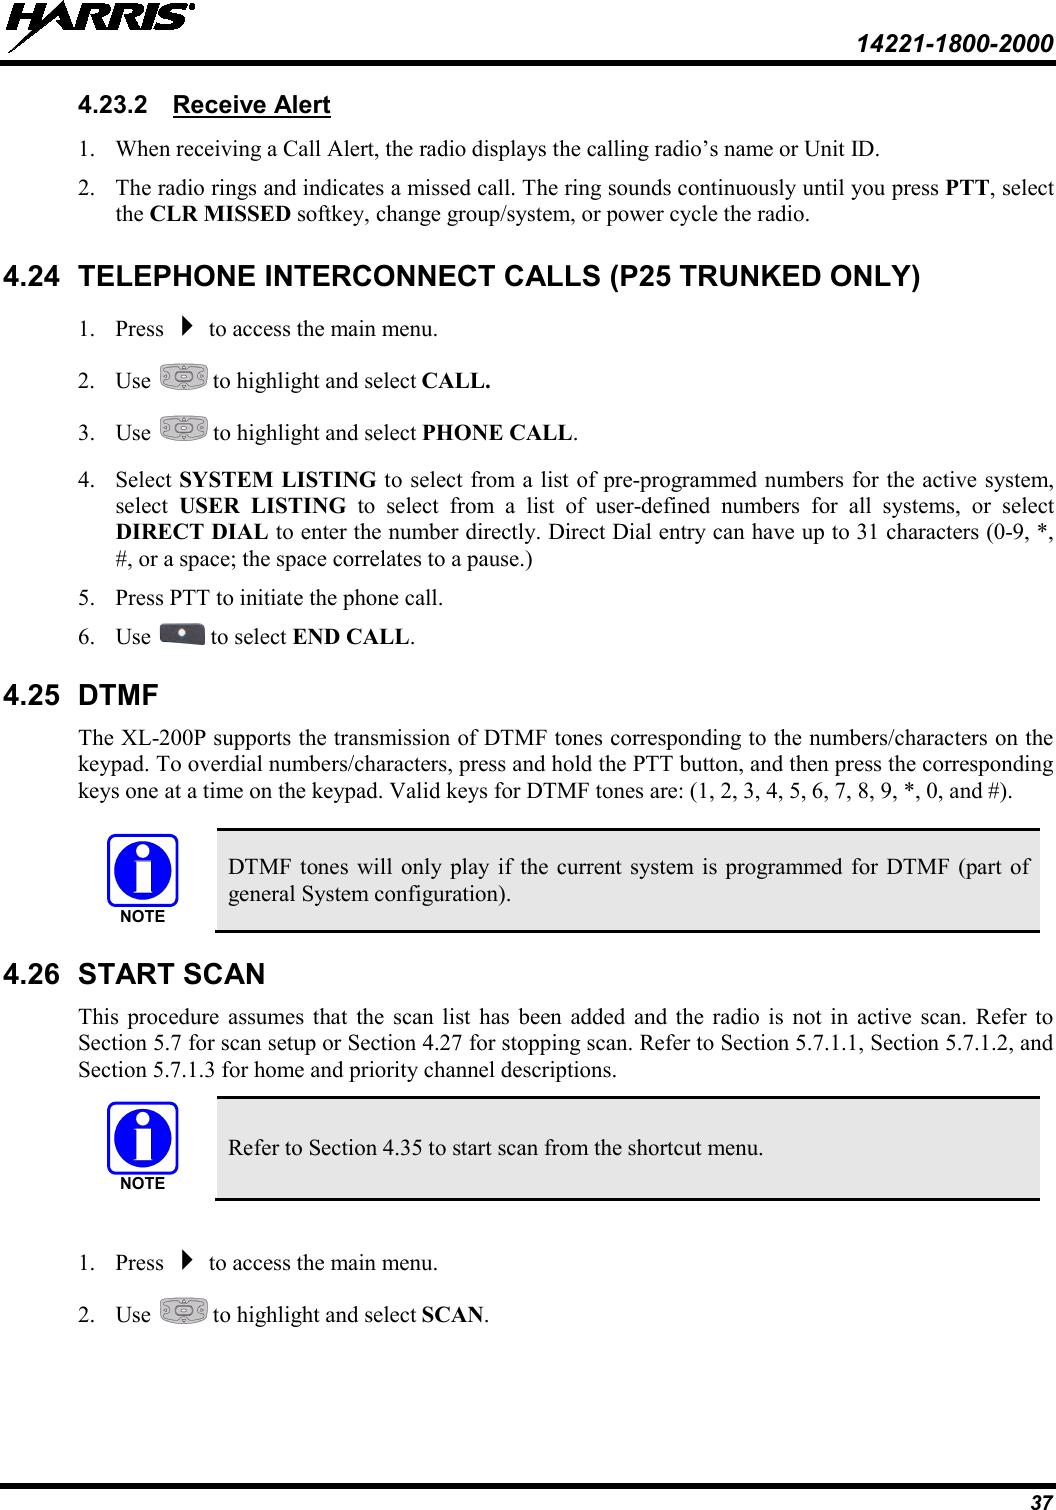  14221-1800-2000 37 4.23.2 1. When receiving a Call Alert, the radio displays the calling radio’s name or Unit ID.  Receive Alert 2. The radio rings and indicates a missed call. The ring sounds continuously until you press PTT, select the CLR MISSED softkey, change group/system, or power cycle the radio. 4.24 TELEPHONE INTERCONNECT CALLS (P25 TRUNKED ONLY) 1. Press  to access the main menu. 2. Use   to highlight and select CALL. 3. Use   to highlight and select PHONE CALL. 4. Select SYSTEM LISTING to select from a list of pre-programmed numbers for the active system, select  USER LISTING to select from a list of user-defined numbers for all systems, or select DIRECT DIAL to enter the number directly. Direct Dial entry can have up to 31 characters (0-9, *, #, or a space; the space correlates to a pause.) 5. Press PTT to initiate the phone call. 6. Use   to select END CALL. 4.25 DTMF The XL-200P supports the transmission of DTMF tones corresponding to the numbers/characters on the keypad. To overdial numbers/characters, press and hold the PTT button, and then press the corresponding keys one at a time on the keypad. Valid keys for DTMF tones are: (1, 2, 3, 4, 5, 6, 7, 8, 9, *, 0, and #).   DTMF tones will only play if the current system is programmed for DTMF (part of general System configuration). 4.26 START SCAN This procedure assumes that the scan list has been added and the radio is not in active scan. Refer to Section 5.7 for scan setup or Section 4.27 for stopping scan. Refer to Section 5.7.1.1, Section 5.7.1.2, and Section 5.7.1.3 for home and priority channel descriptions.  Refer to Section 4.35 to start scan from the shortcut menu.  1. Press  to access the main menu. 2. Use   to highlight and select SCAN. NOTENOTE